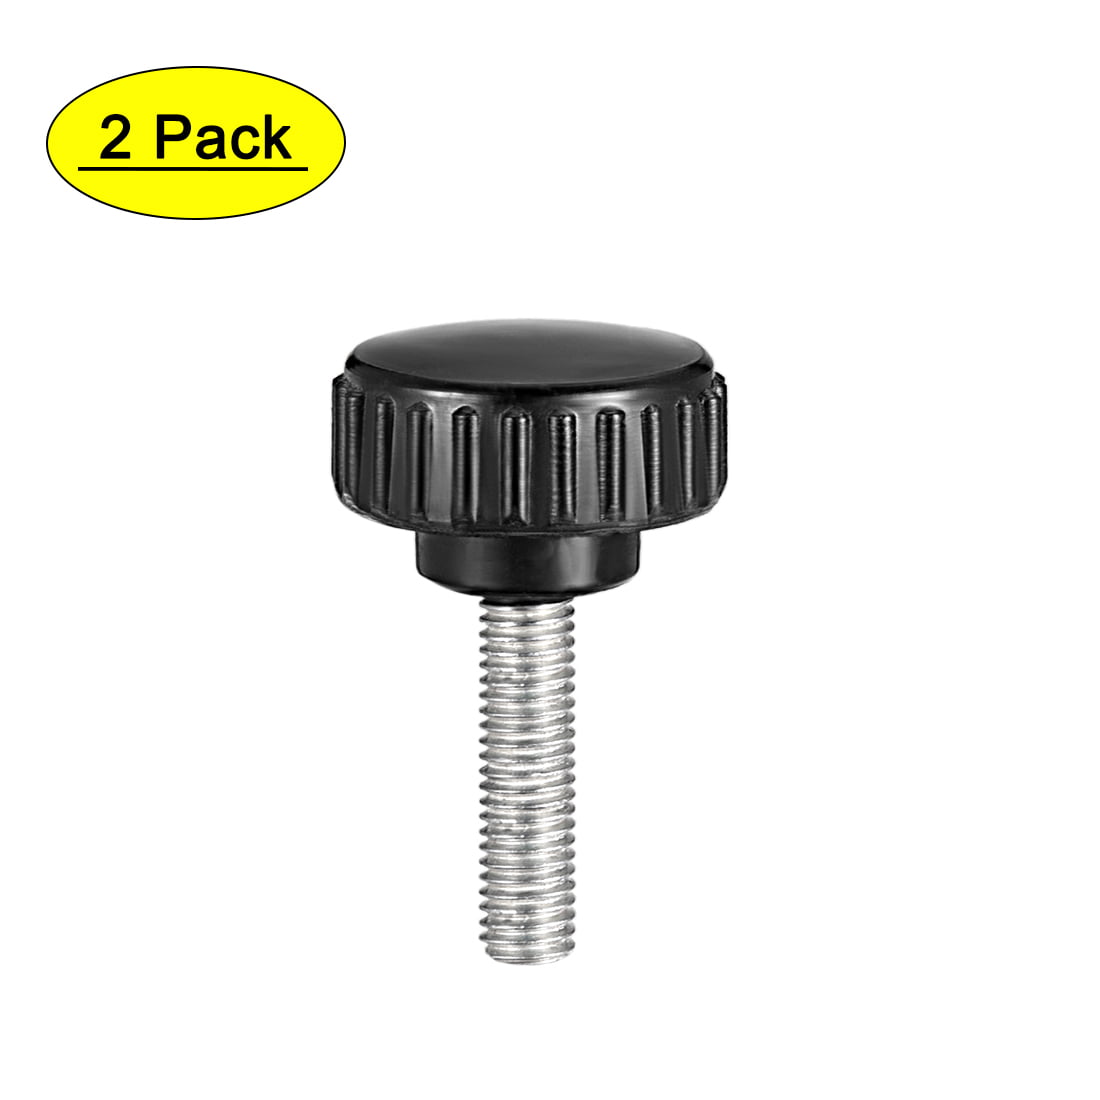 M8 x 30mm Male Thread Knurled Fastening knobs Grip Screw in Type 4 Pieces 